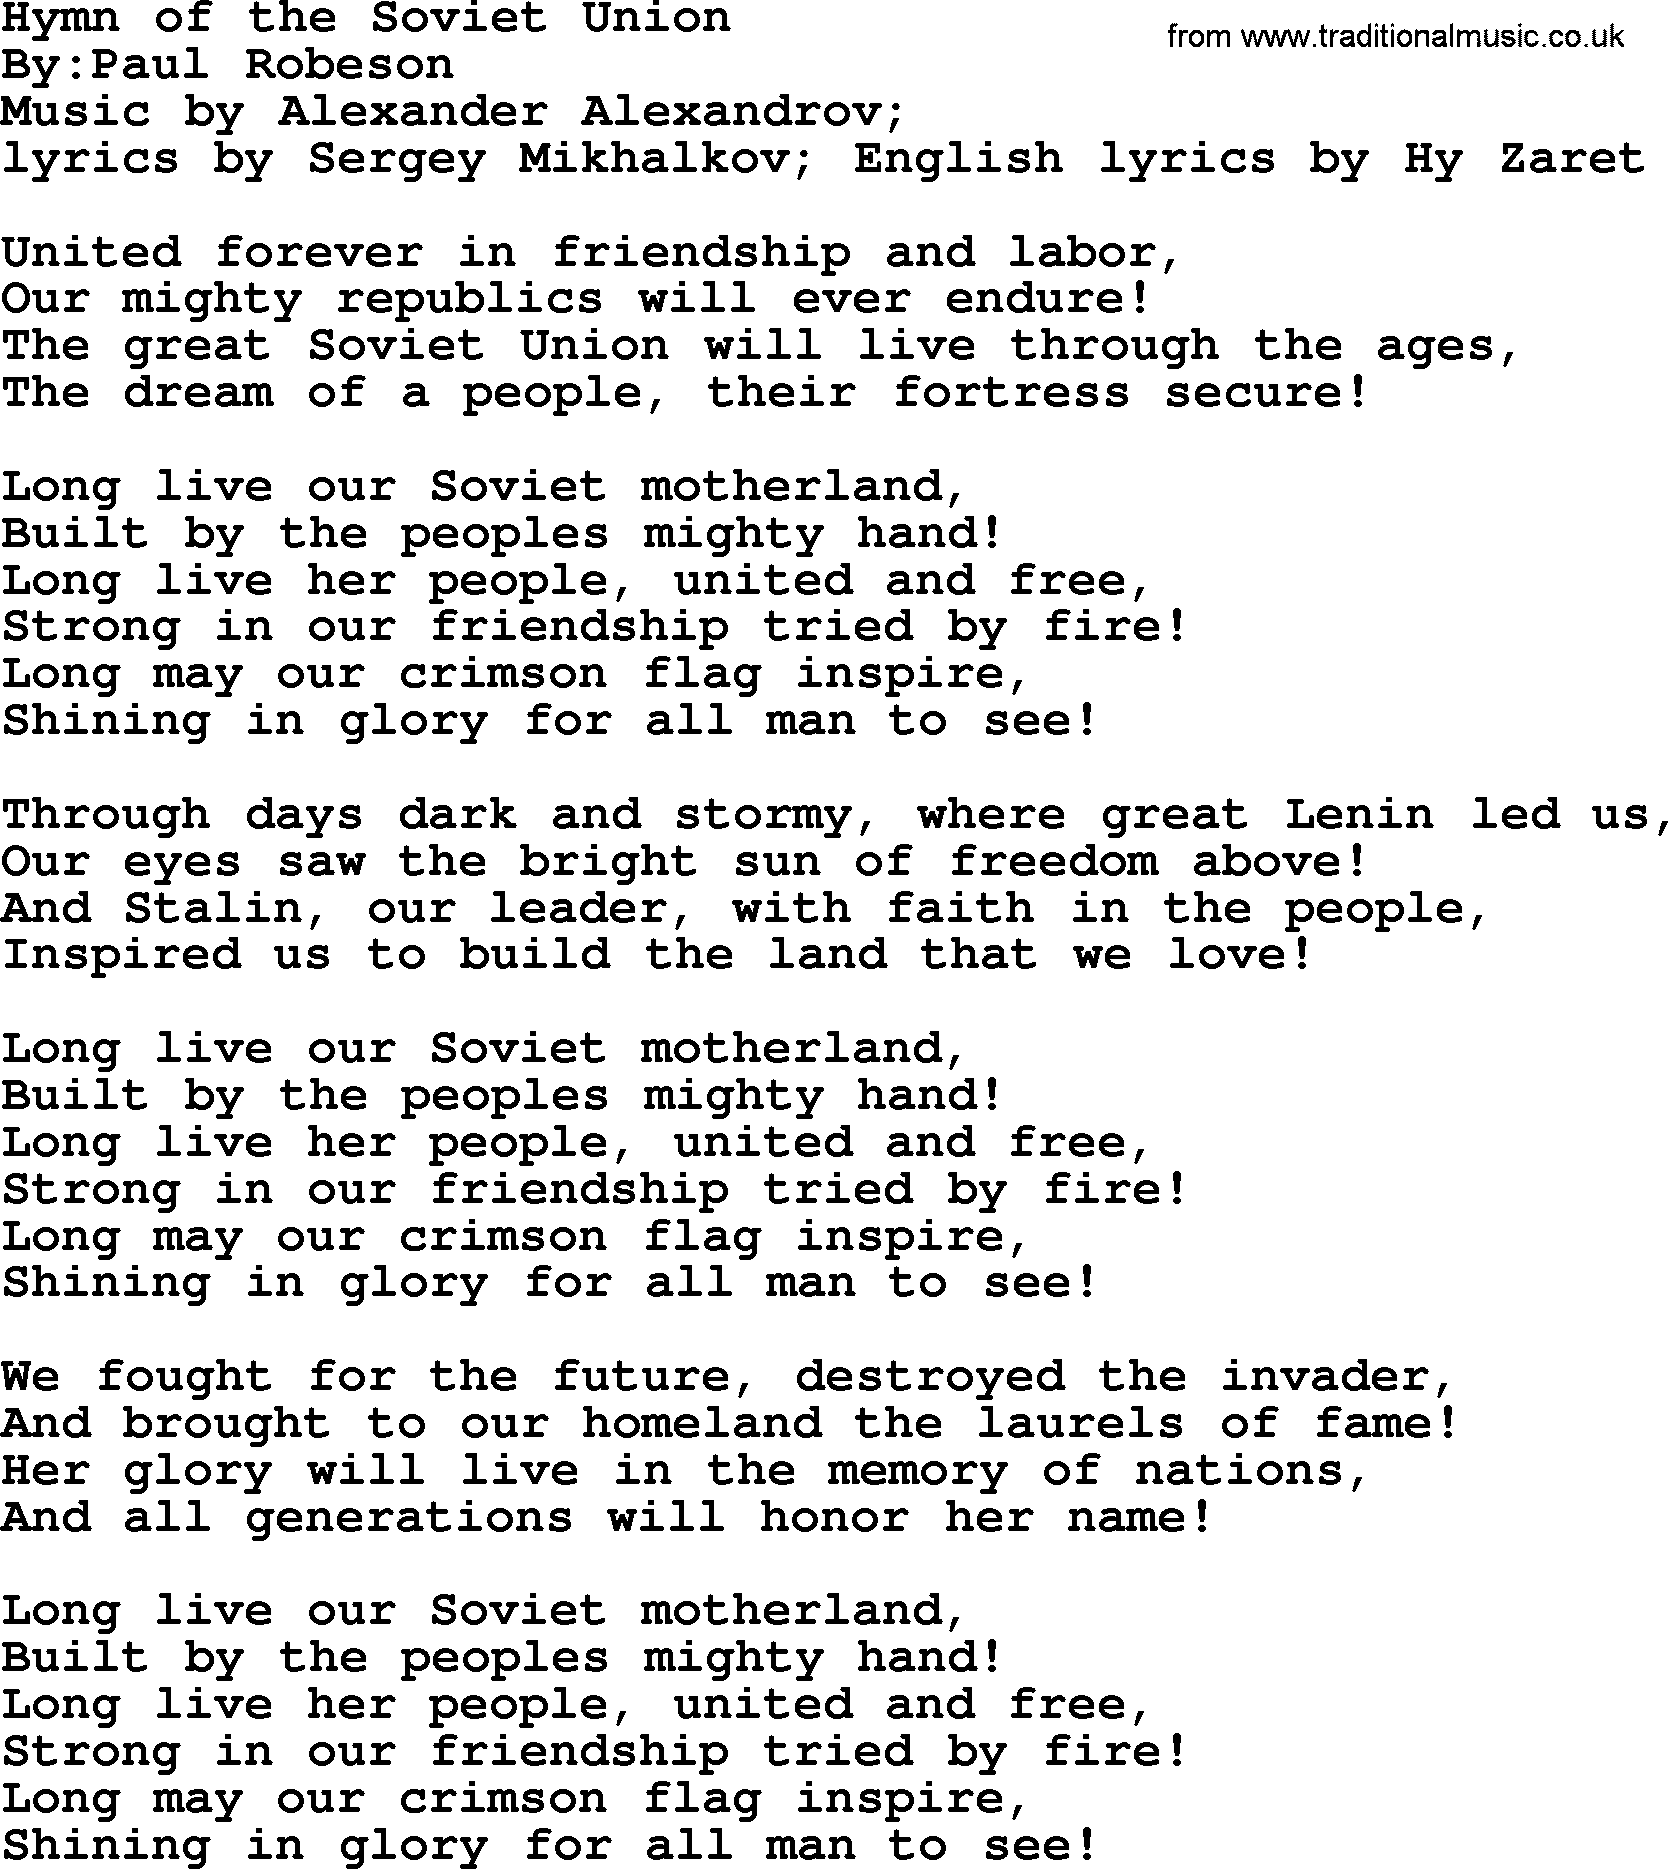 Political, Solidarity, Workers or Union song: Hymn Of The Soviet Union, lyrics